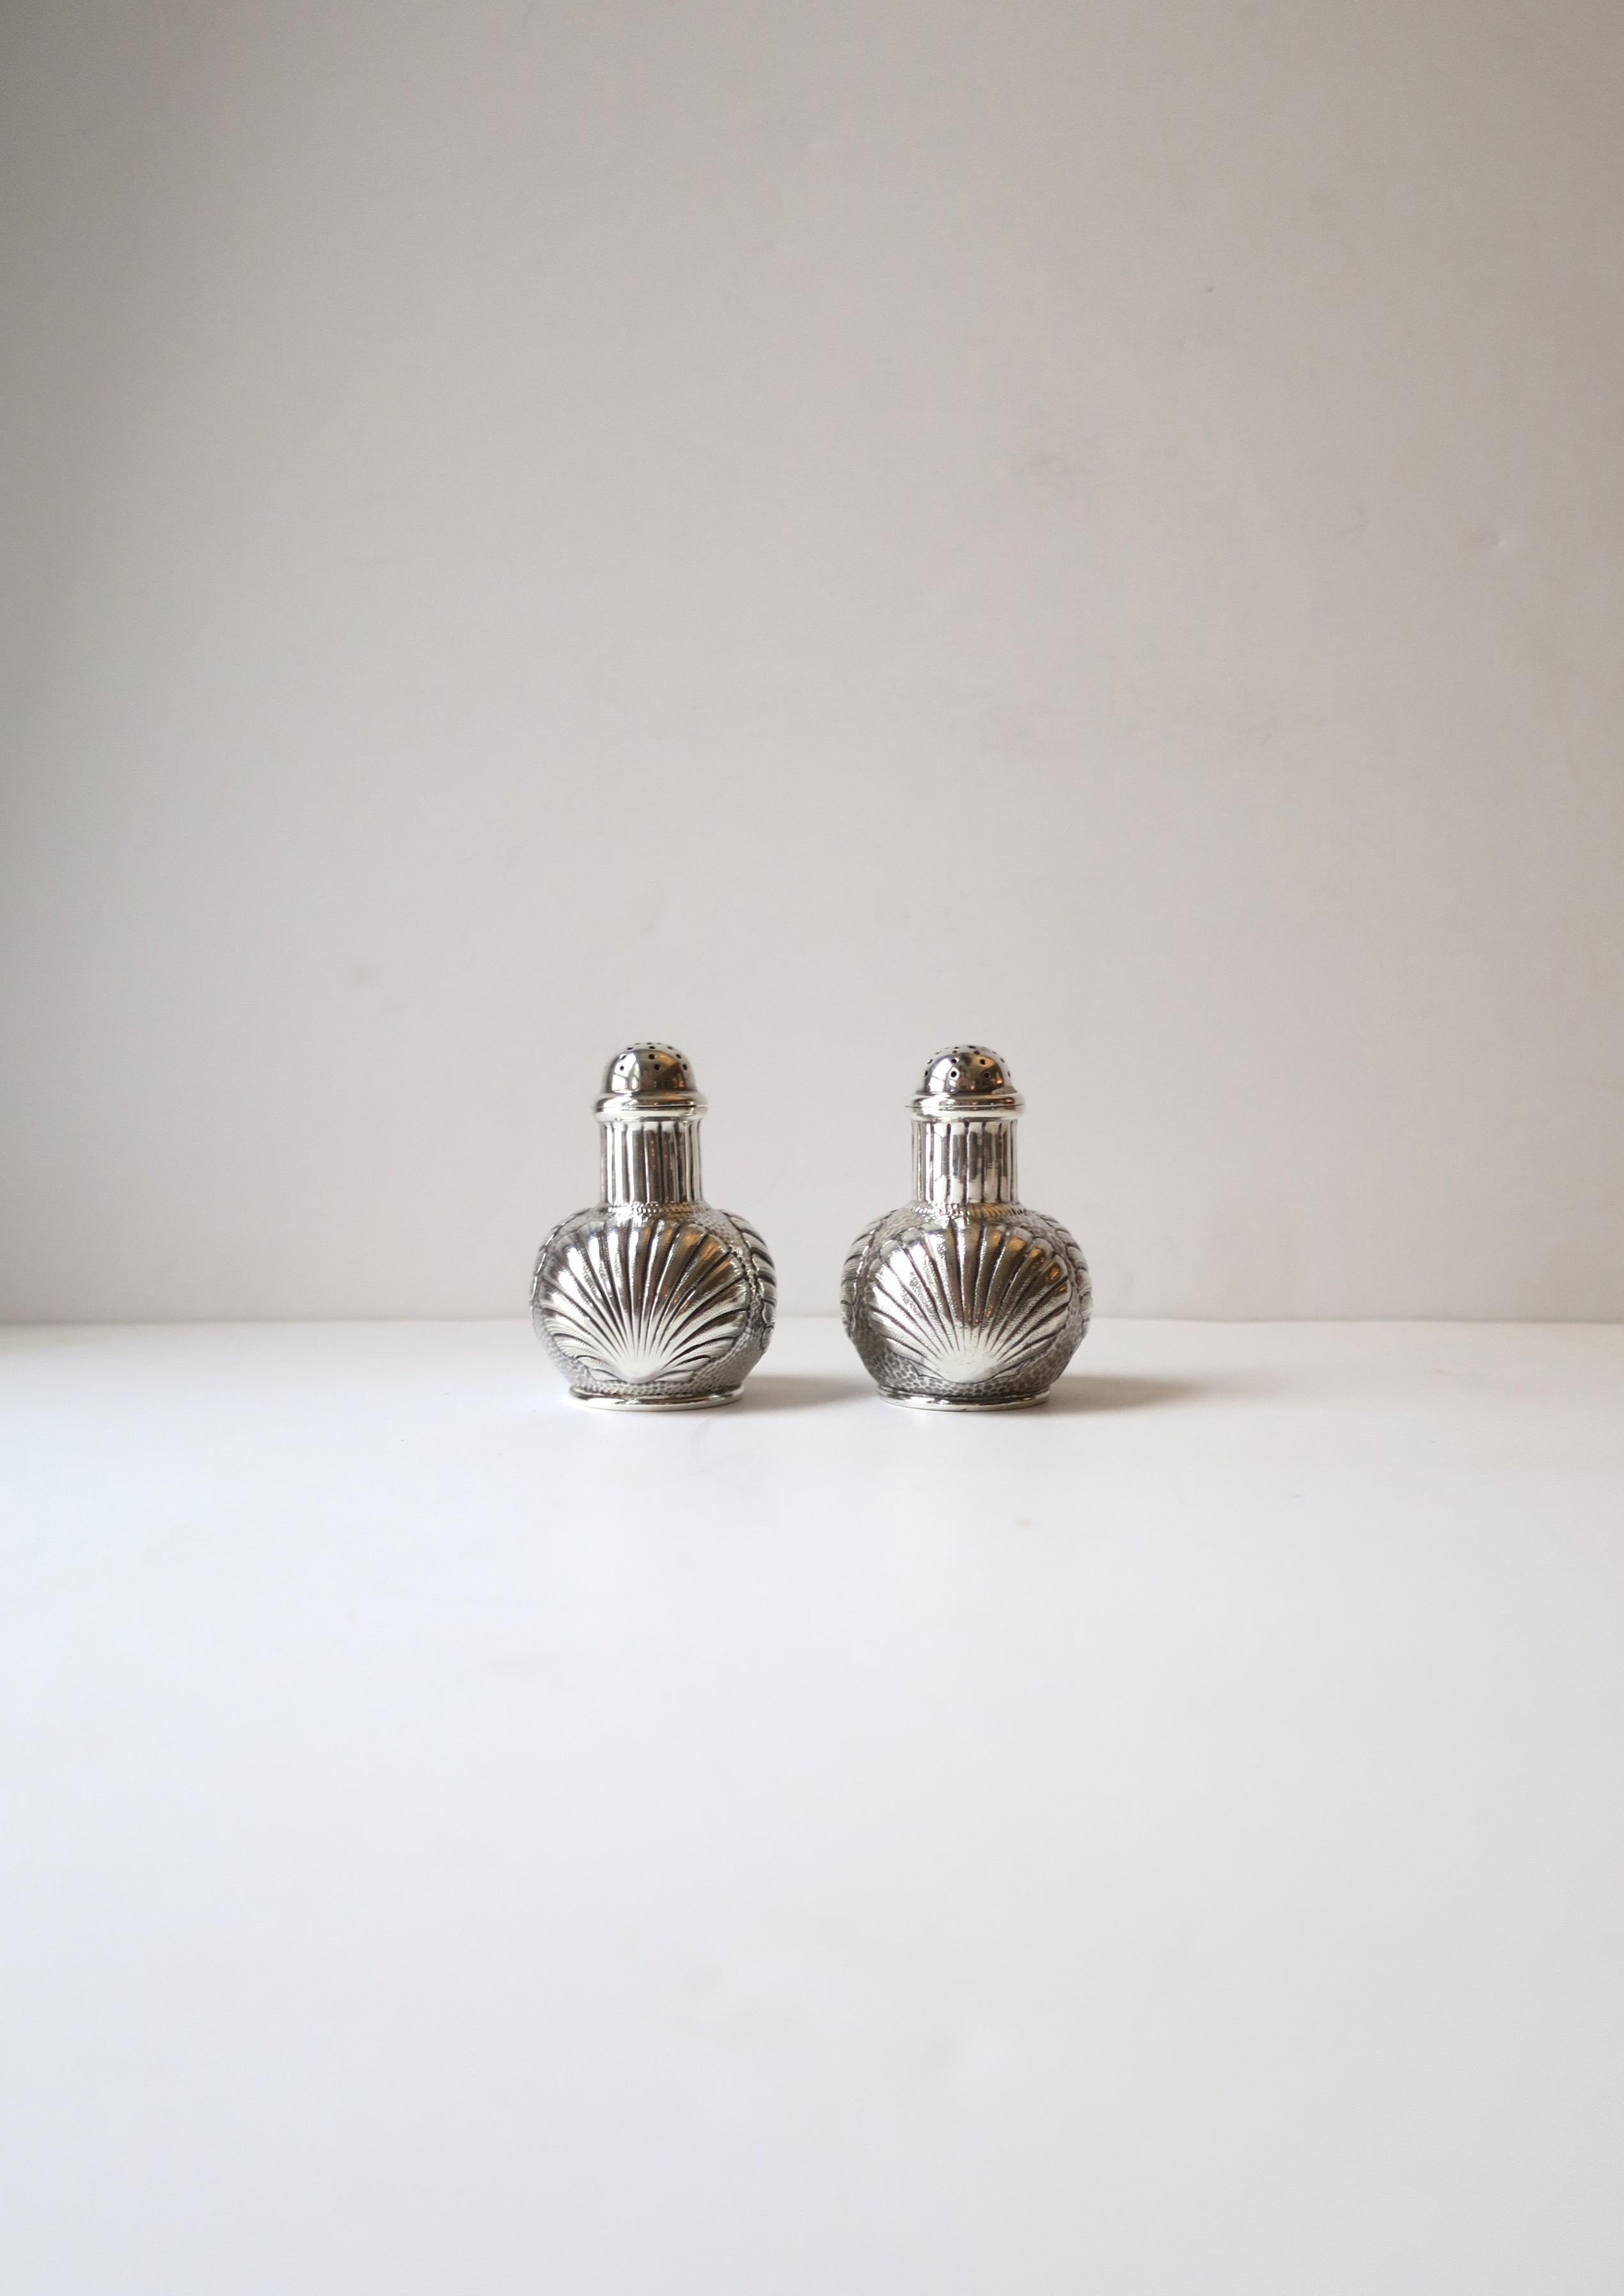 A beautiful and well-made pair of Sterling Silver salt and pepper shakers with scallop seashell design by iconic American jeweler and silversmith J.E. Caldwell & Co, circa 20th century, USA. A great set for everyday use or entertaining, indoors or